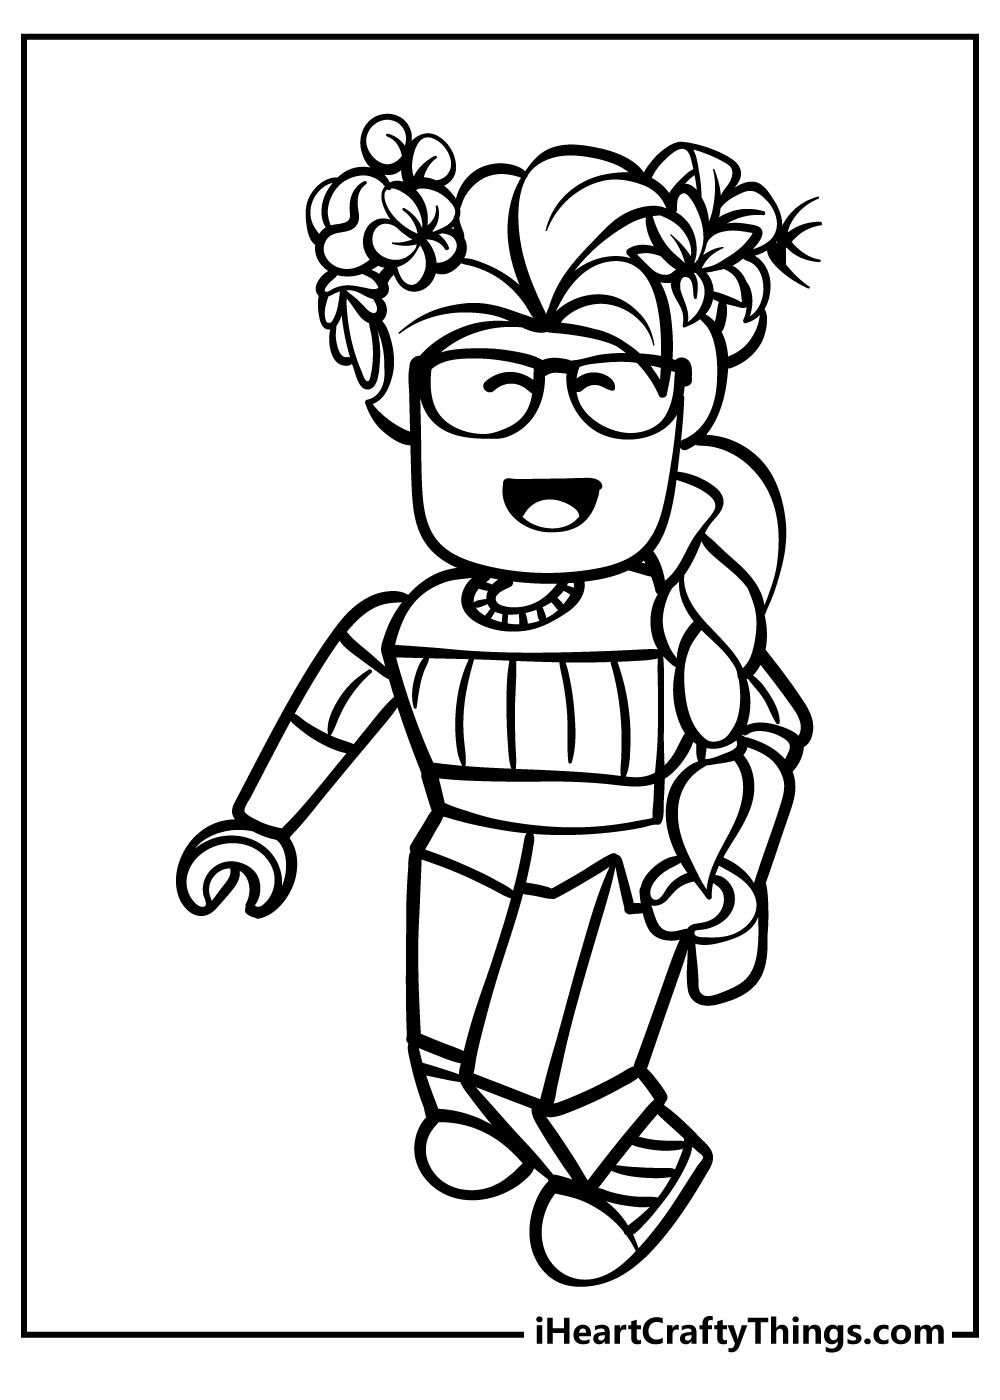 Roblox coloring pages free printable